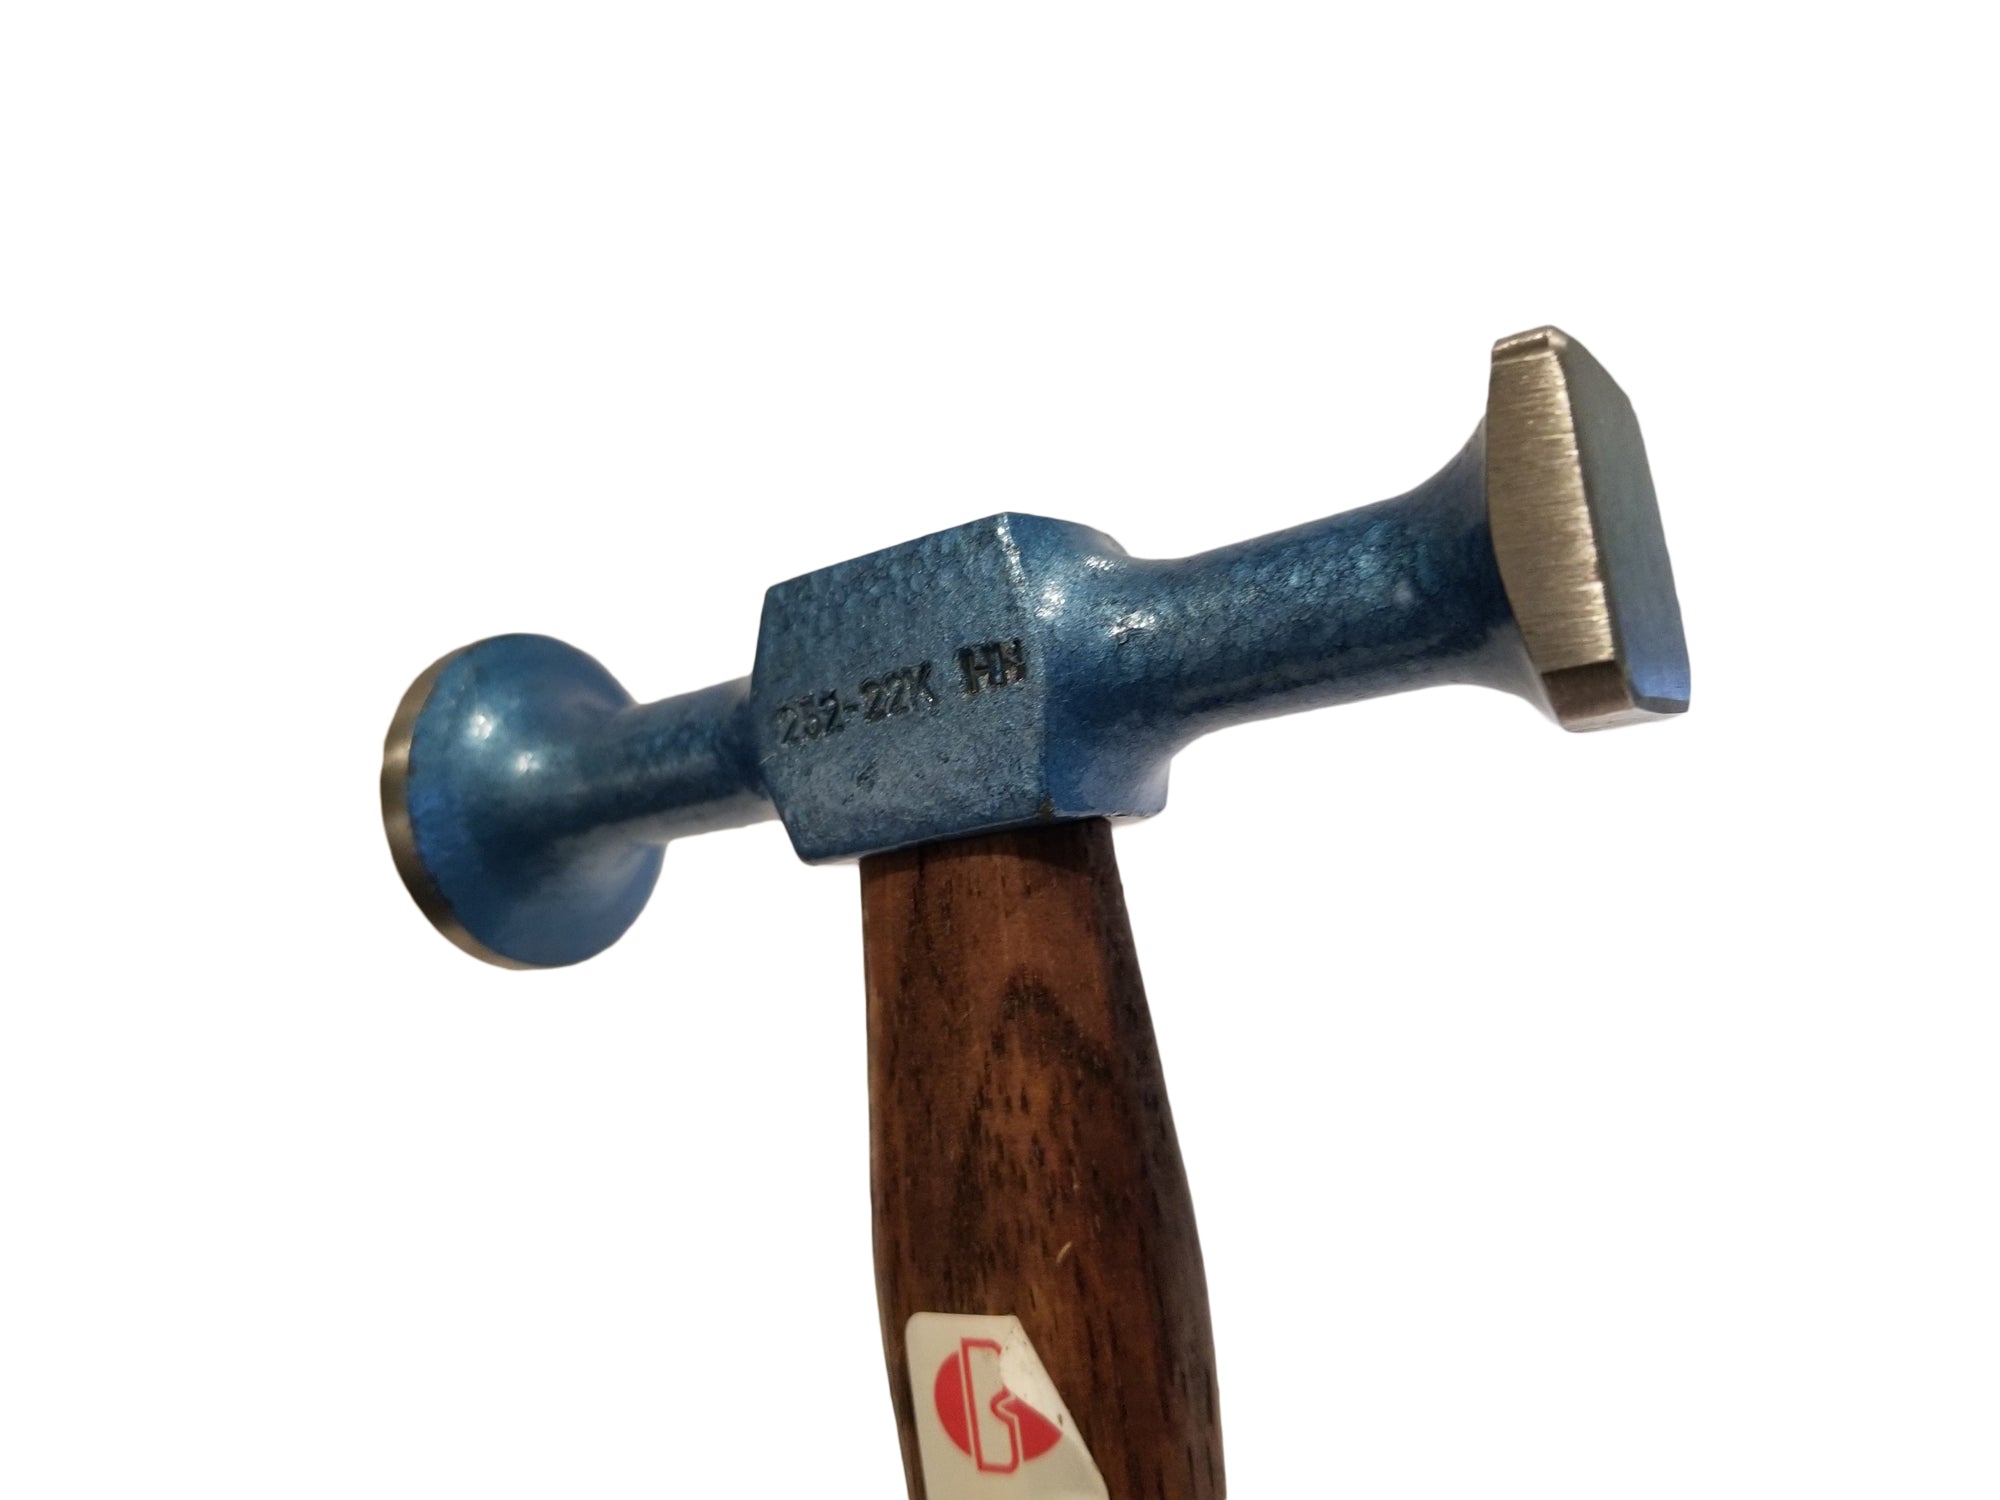 Picard 2522202 Planishing Checked Face Bumping Hammer - Hanks Hammers